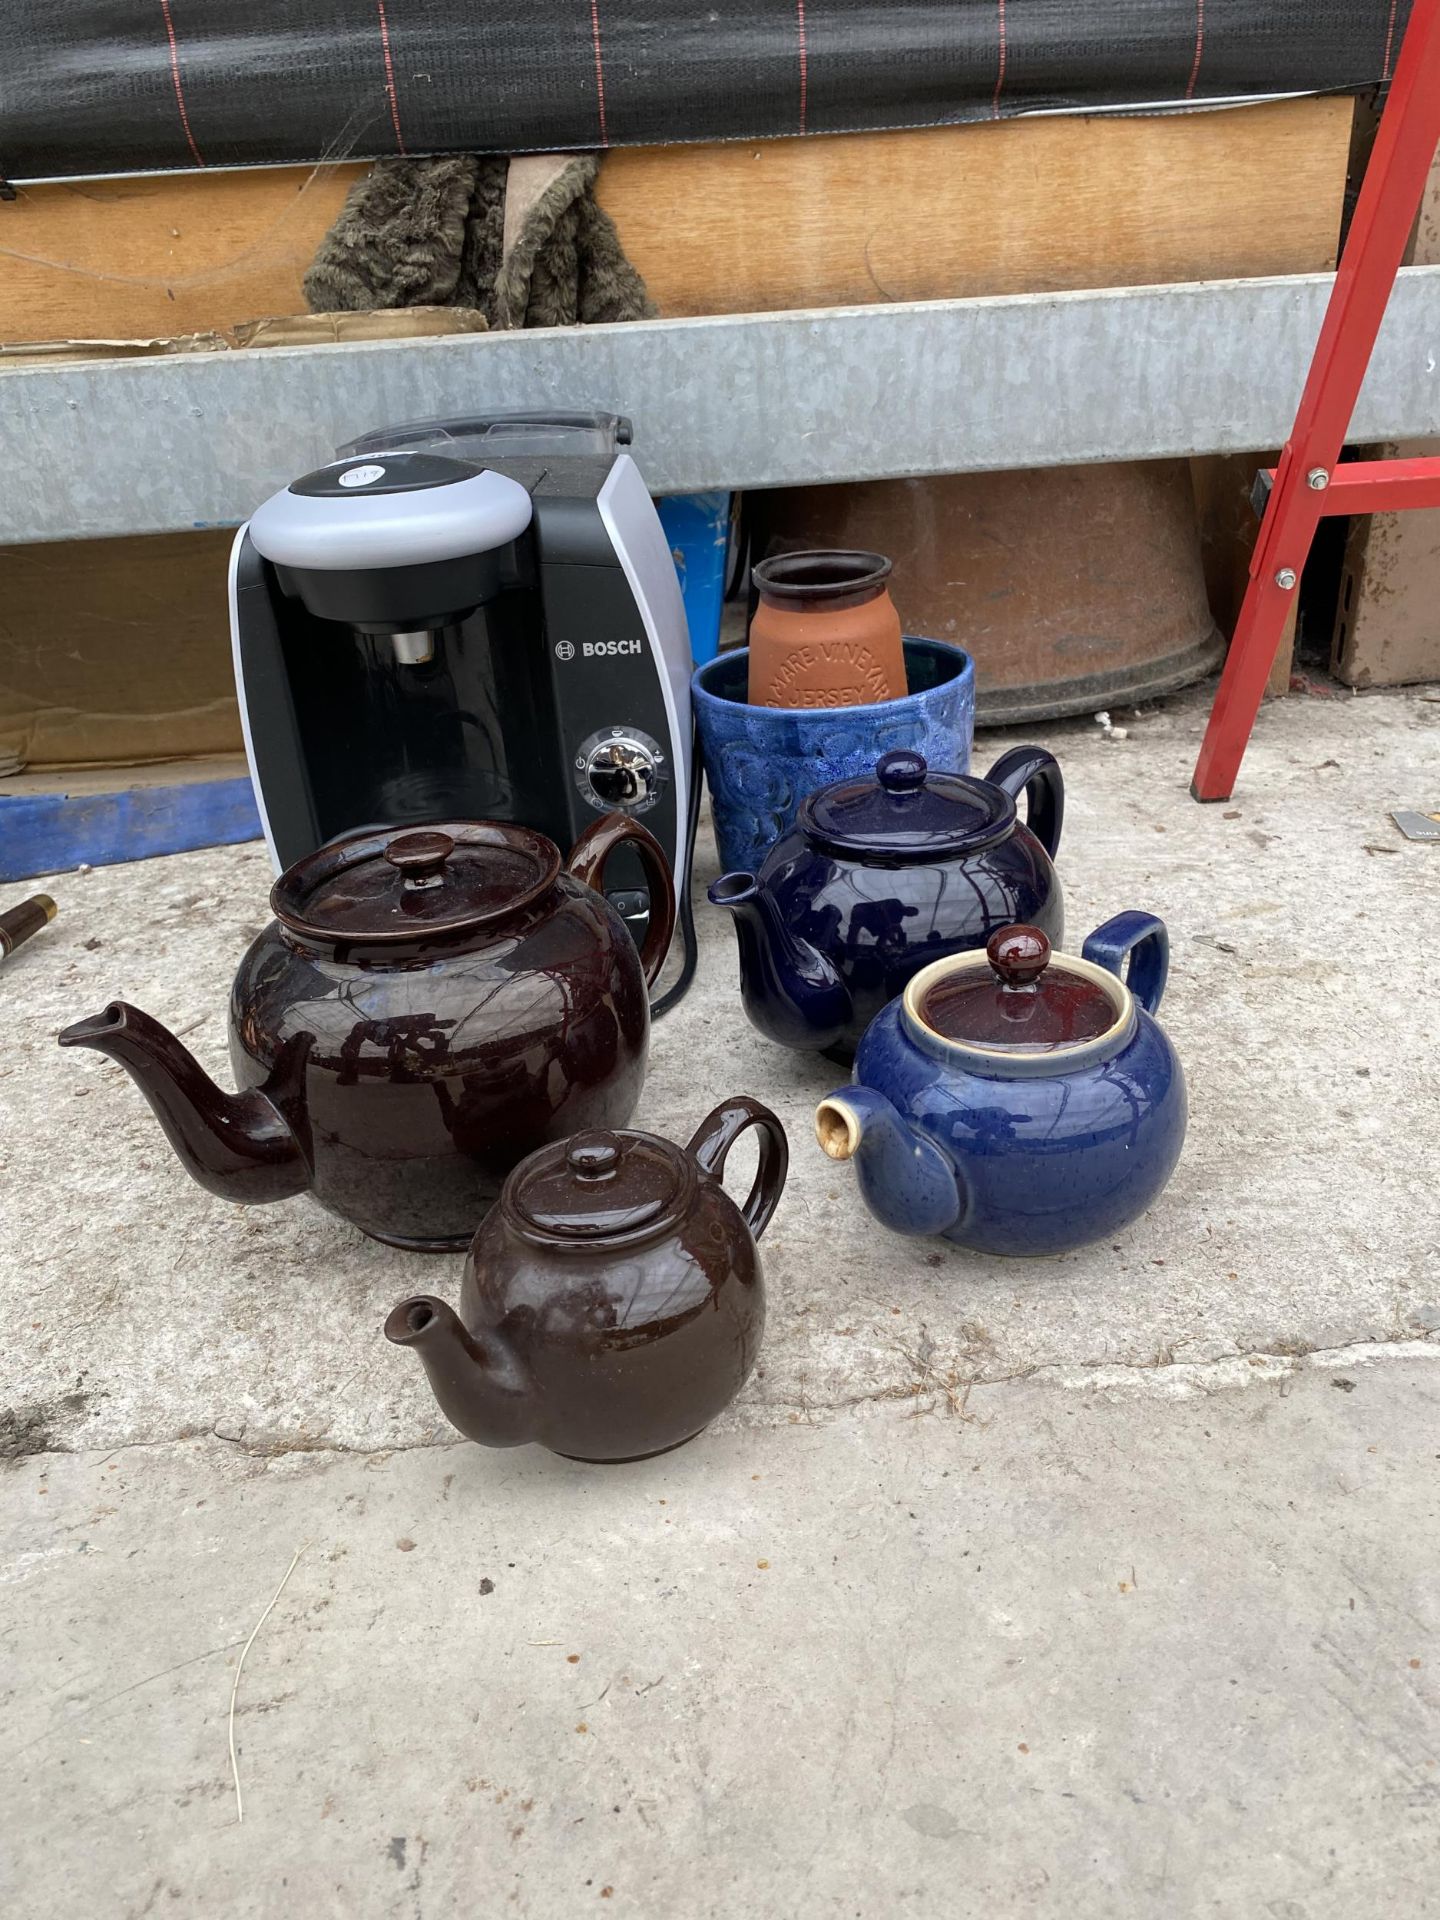 A COFFEE MAKER AND VARIOUS TEAPOTS - Image 2 of 3